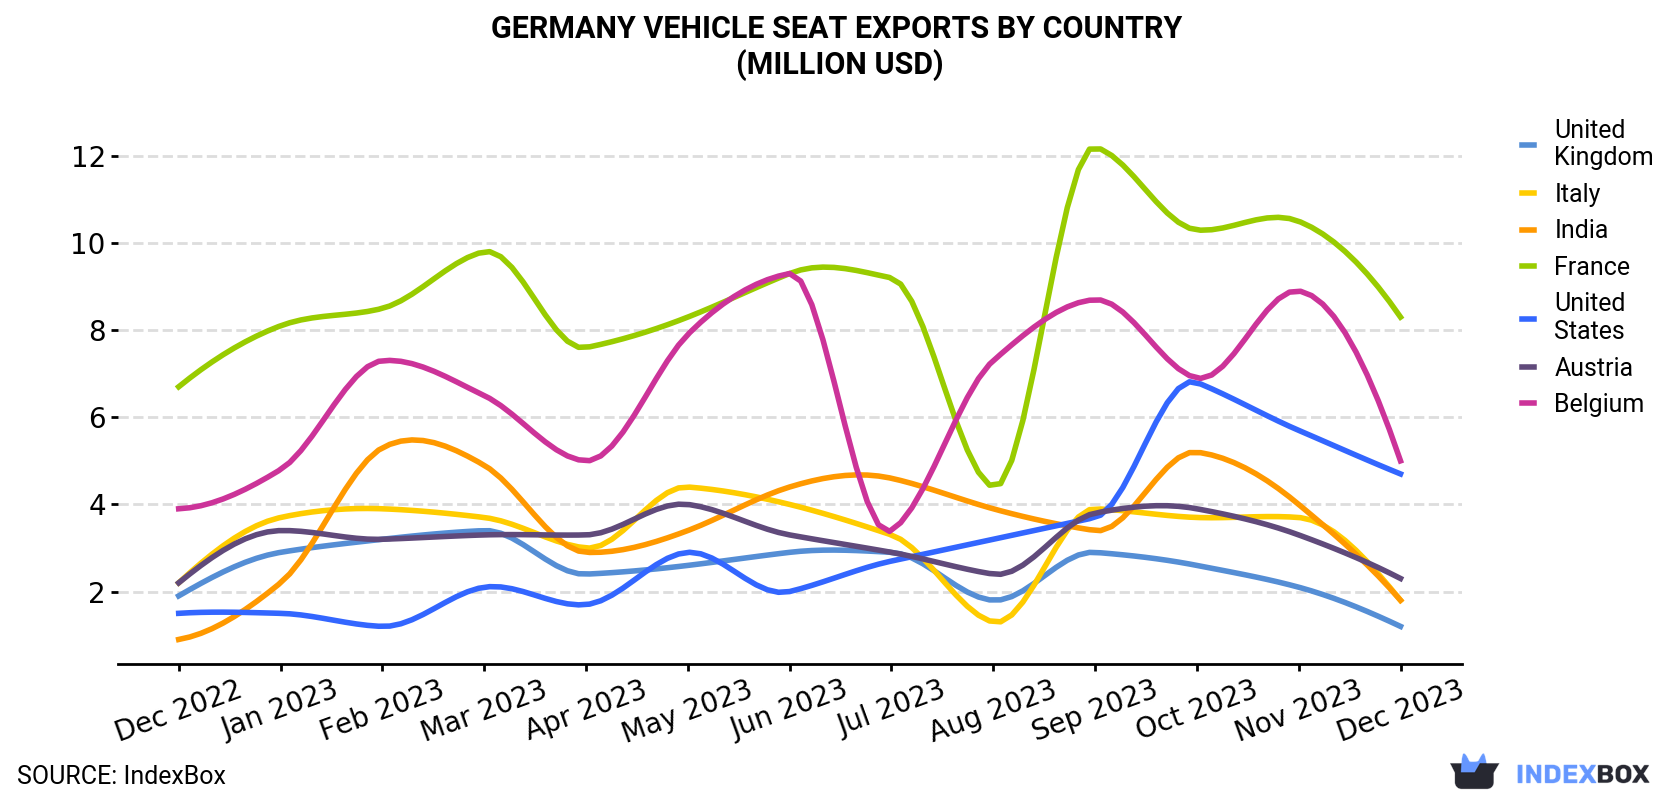 Germany Vehicle Seat Exports By Country (Million USD)